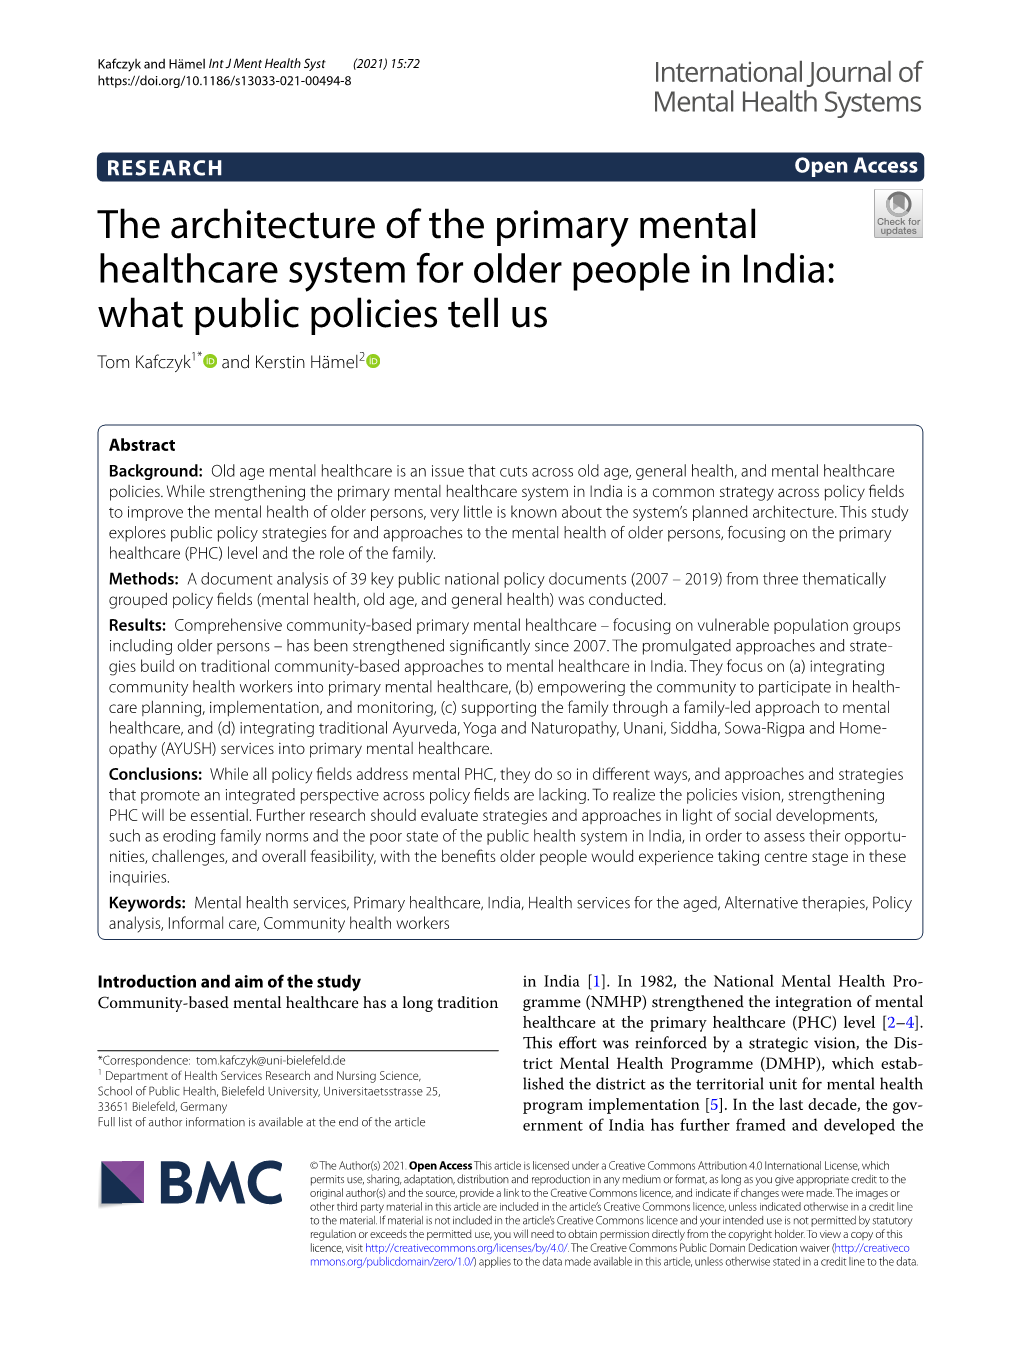 The Architecture of the Primary Mental Healthcare System for Older People in India: What Public Policies Tell Us Tom Kafczyk1* and Kerstin Hämel2